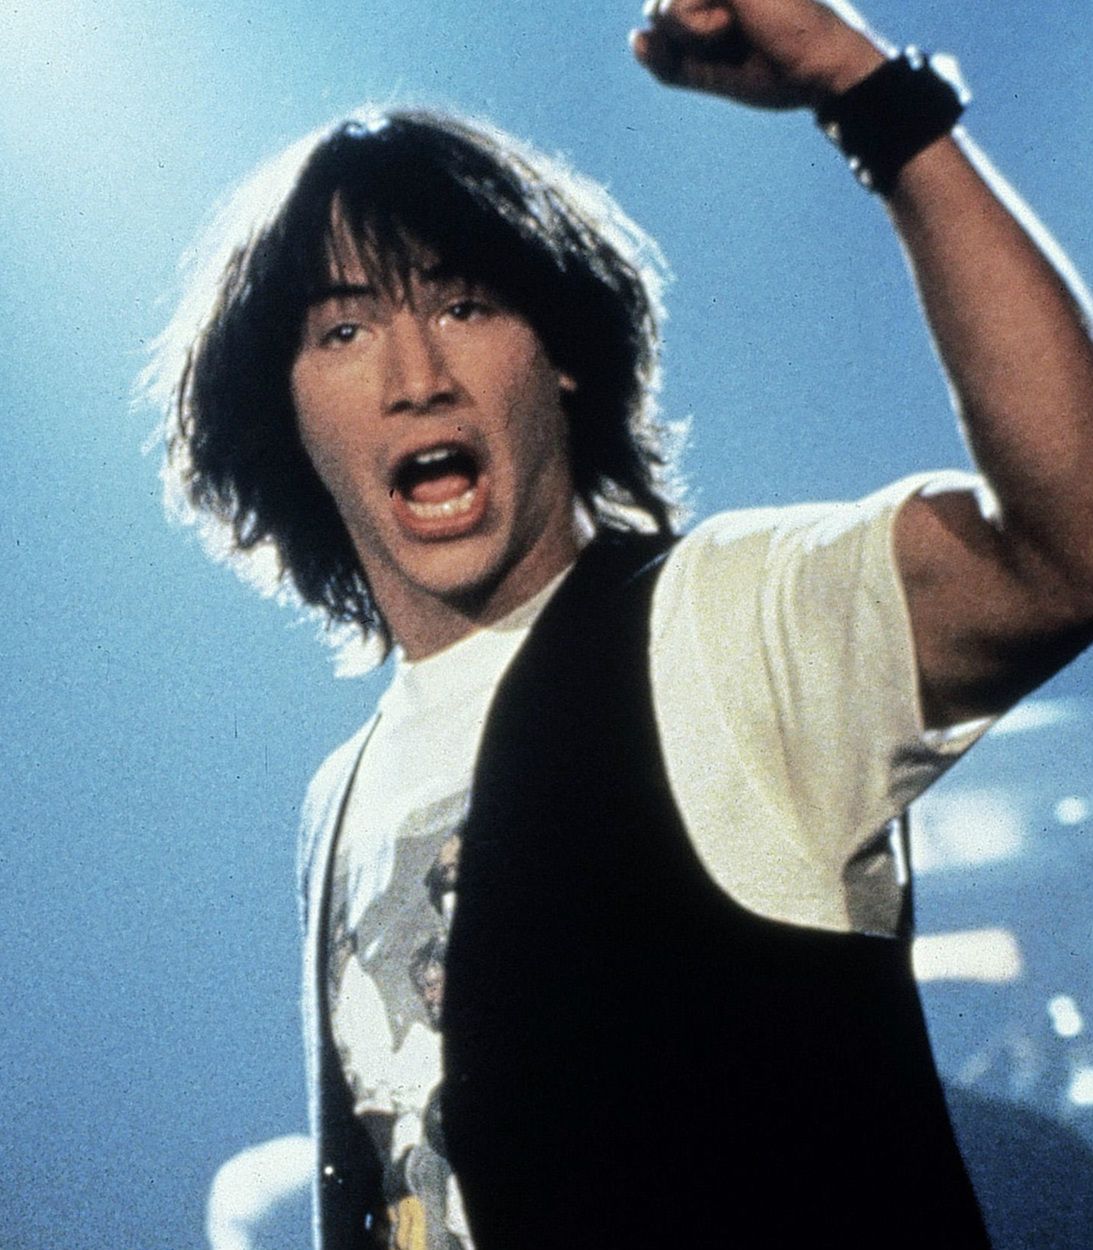 Bill and Ted's Excellent Adventure Keanu Reeves Vertical